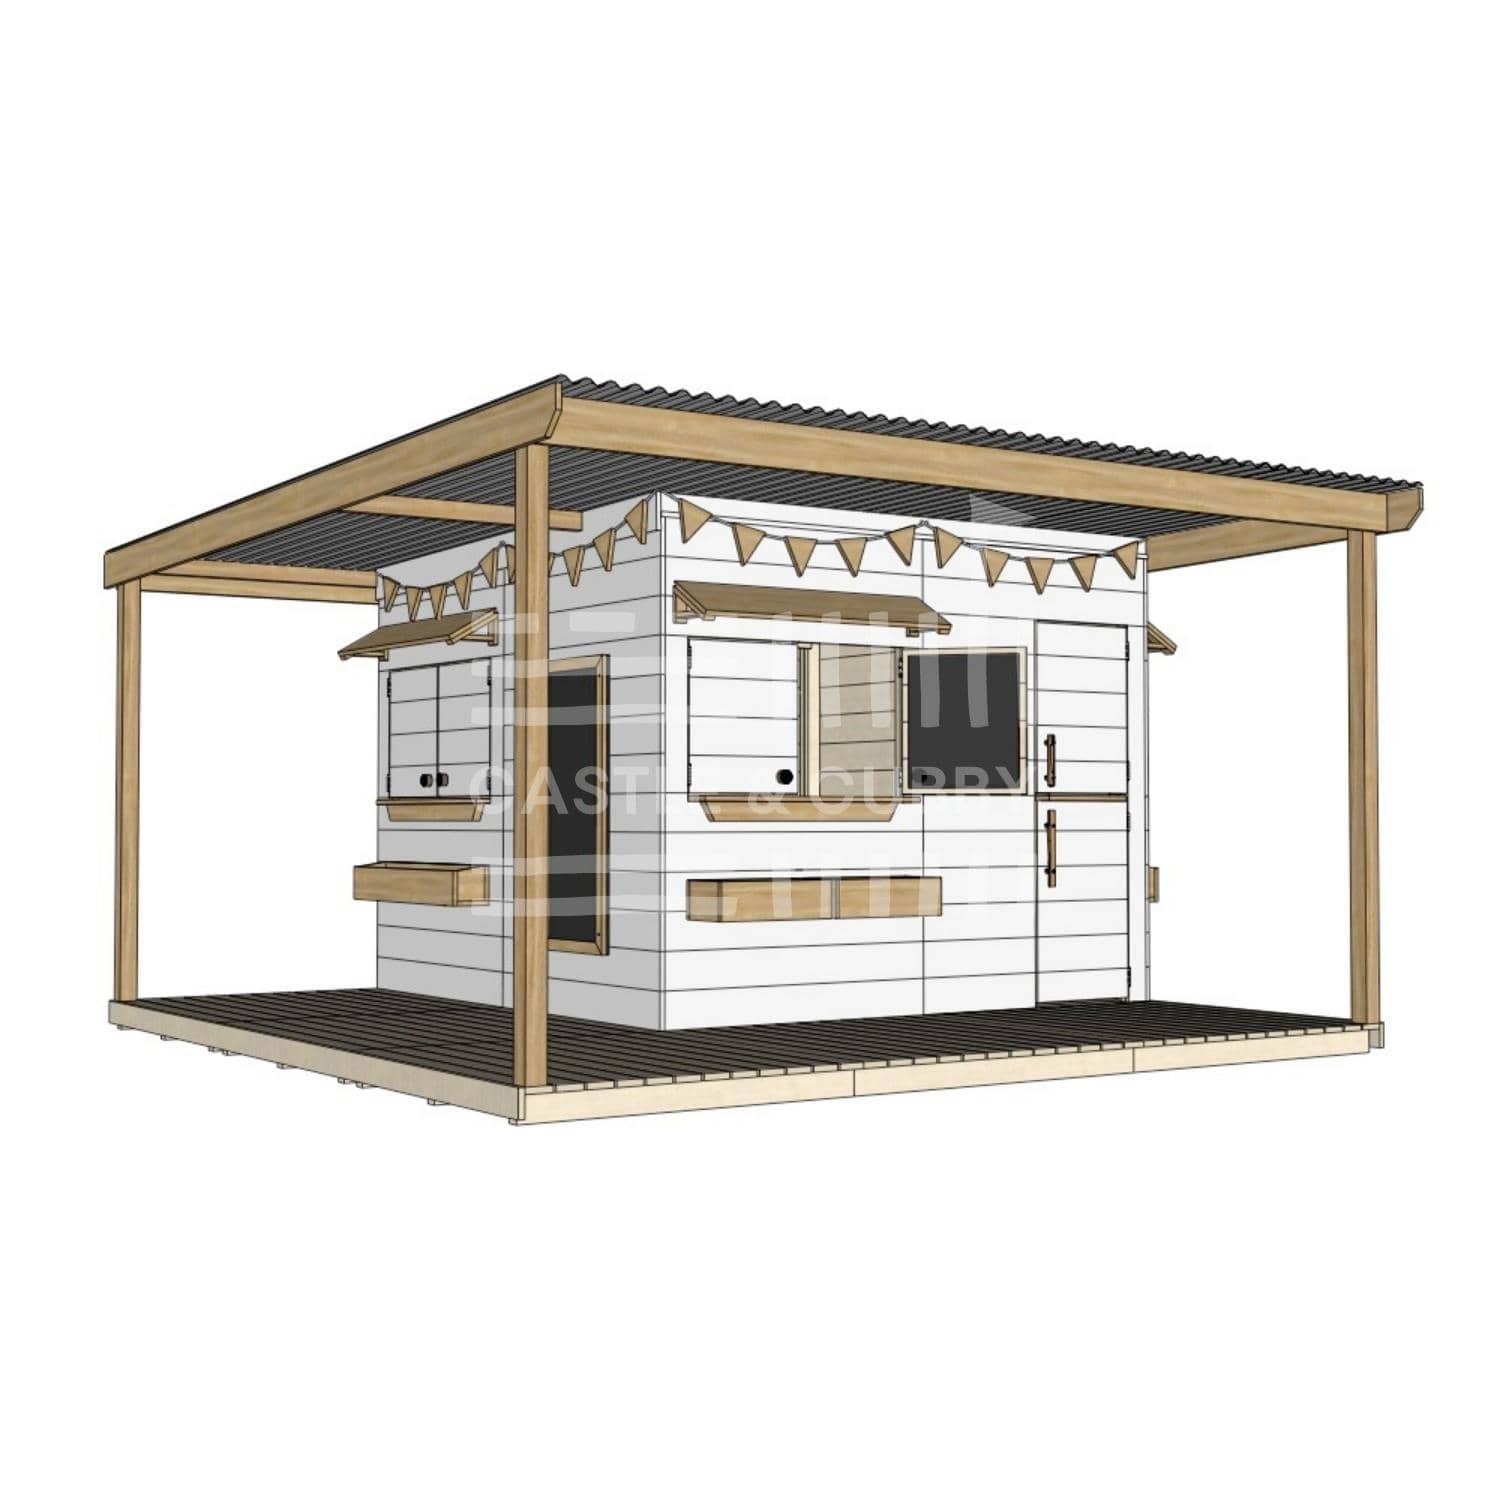 Painted timber extended height cubby house with wraparound verandah and deck for family gardens large square size with accessories